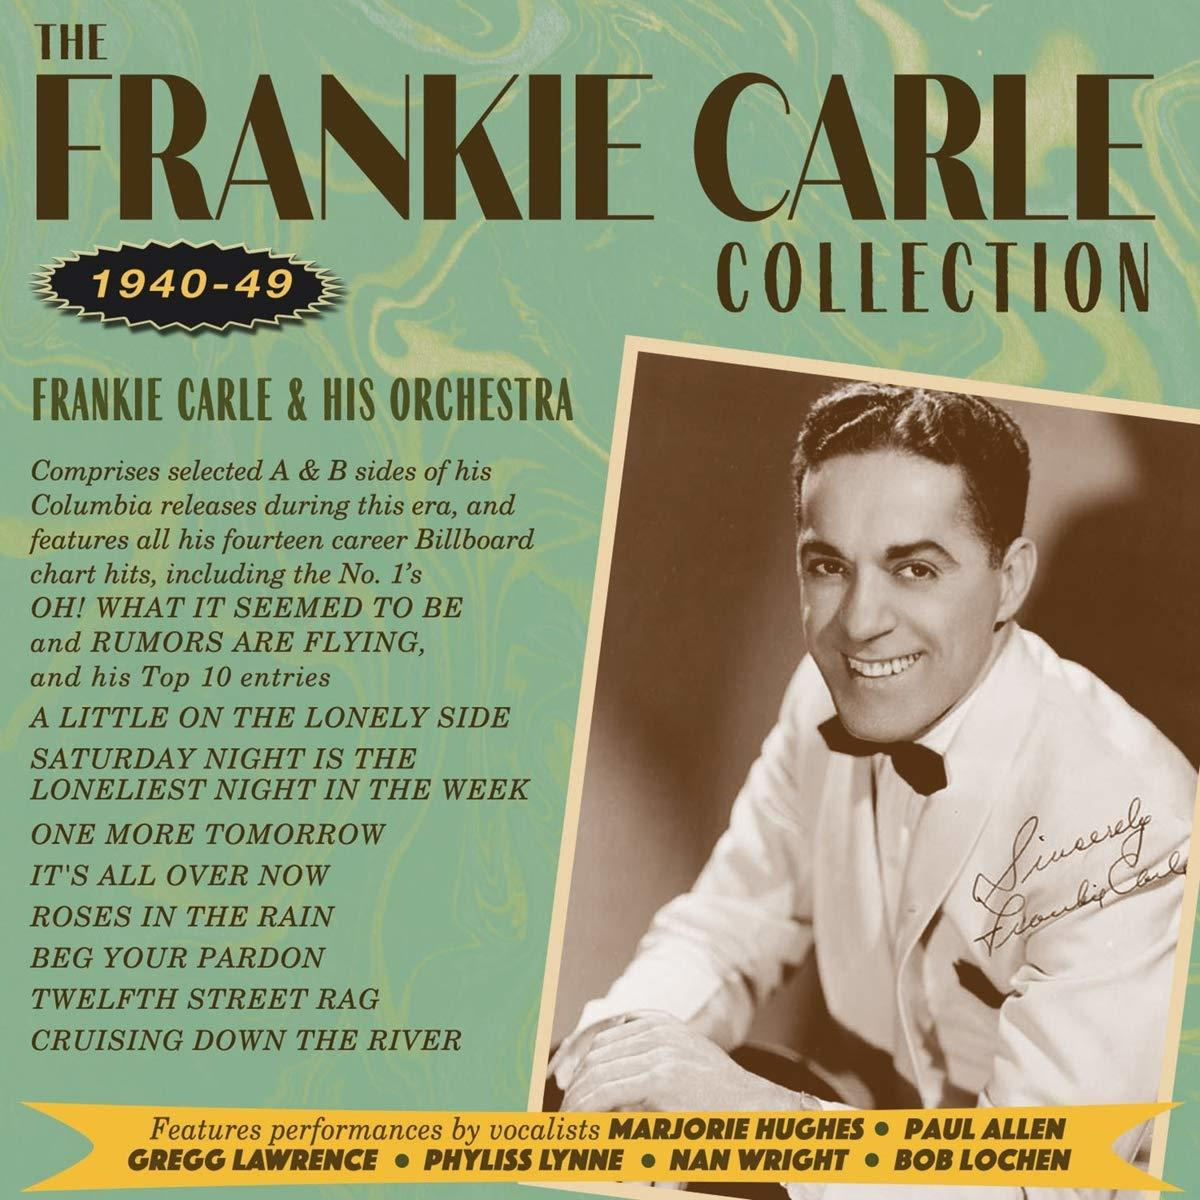 & FRANKIE COLLECTION - (CD) 1940-49 His Carle CARLE Orchestra - Frankie